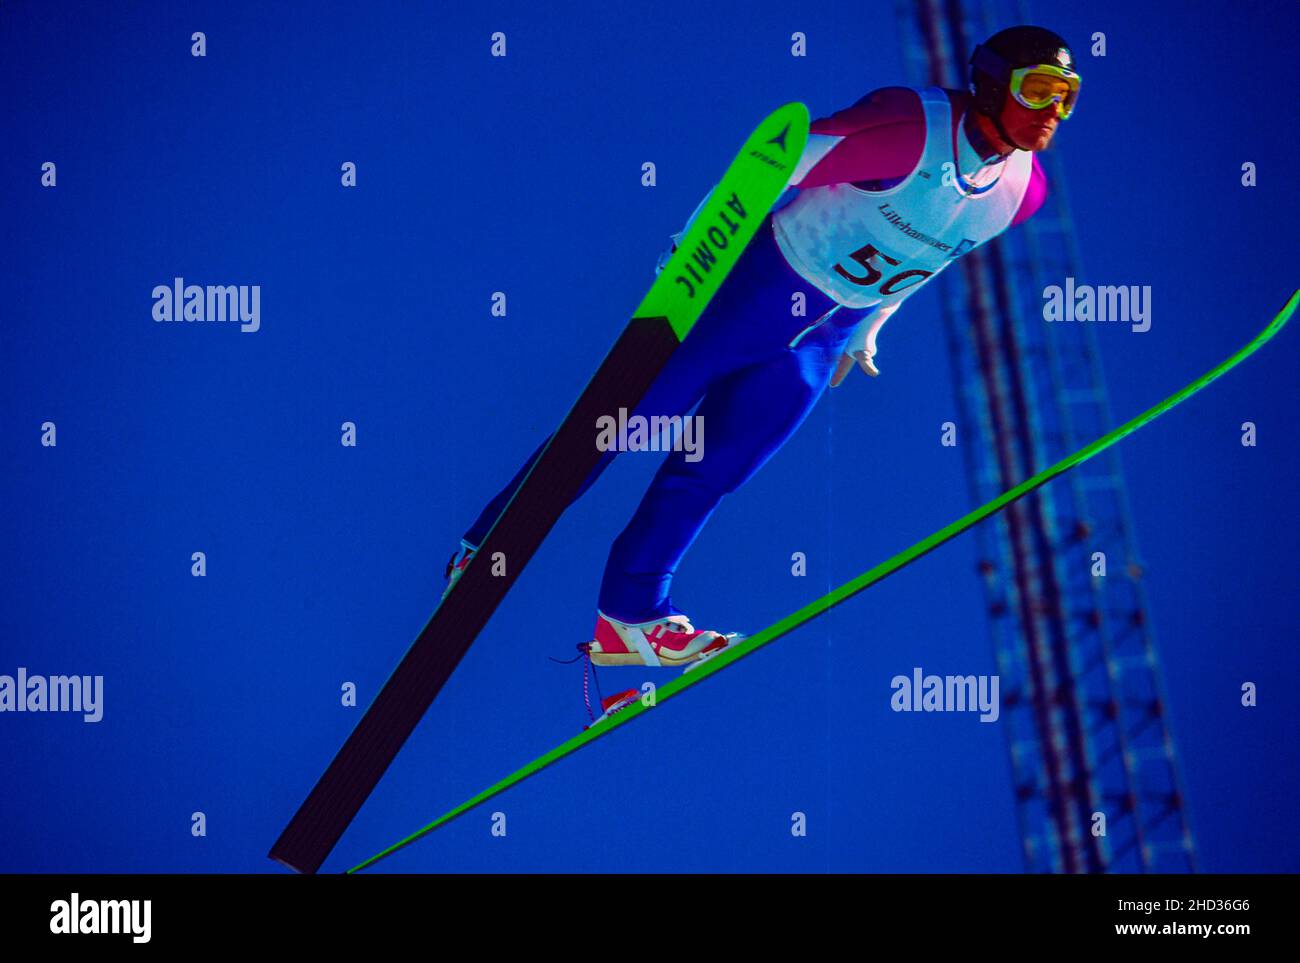 Ted Langlois (USA) competing in the Men's K120 individual ski jumping at the 1994 Olympic Winter Games Stock Photo